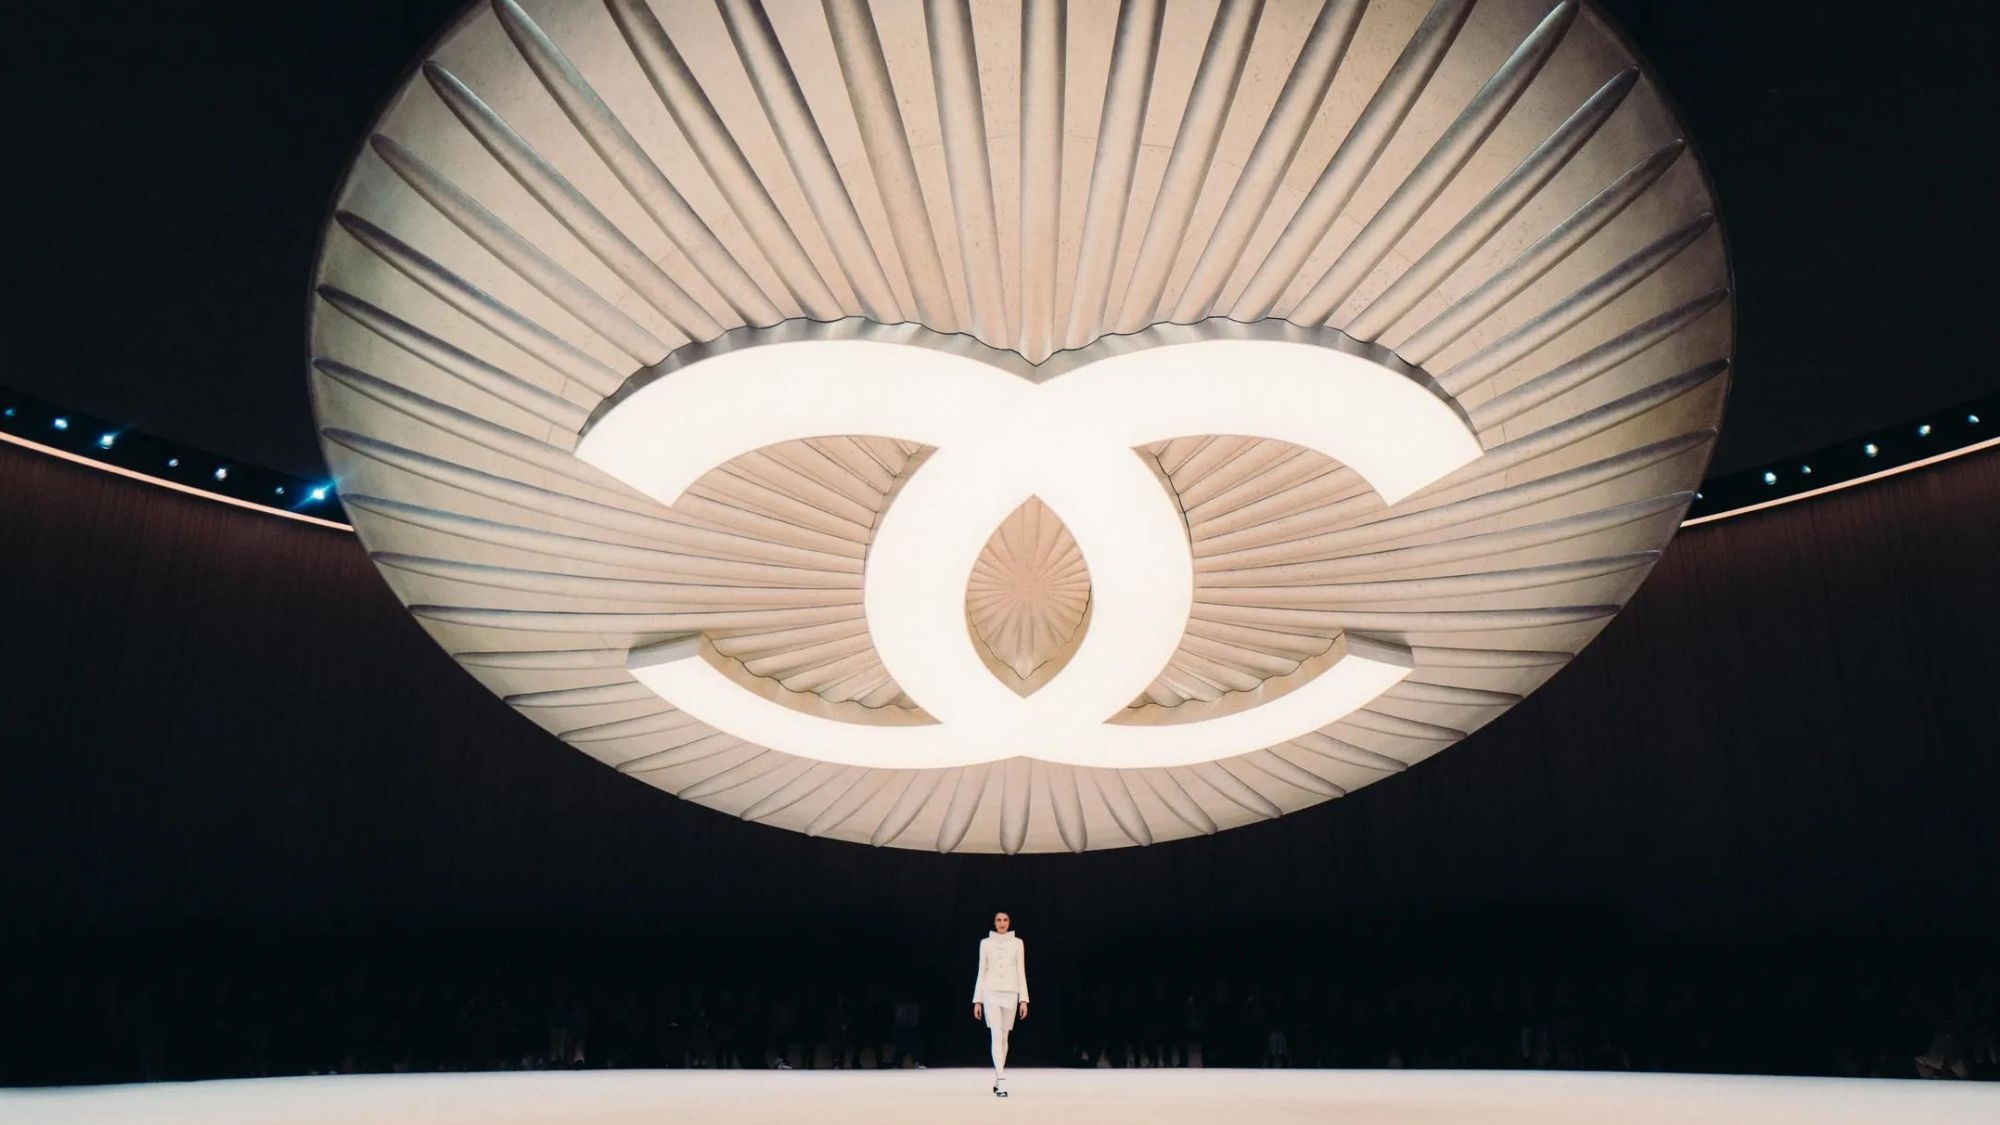 Chanel Haute Couture Spring 2024 by Virginie Viard was presented at the Grand Palais Éphémère in Paris, soundtracked by Kendrick Lamar. Photo: Chanel